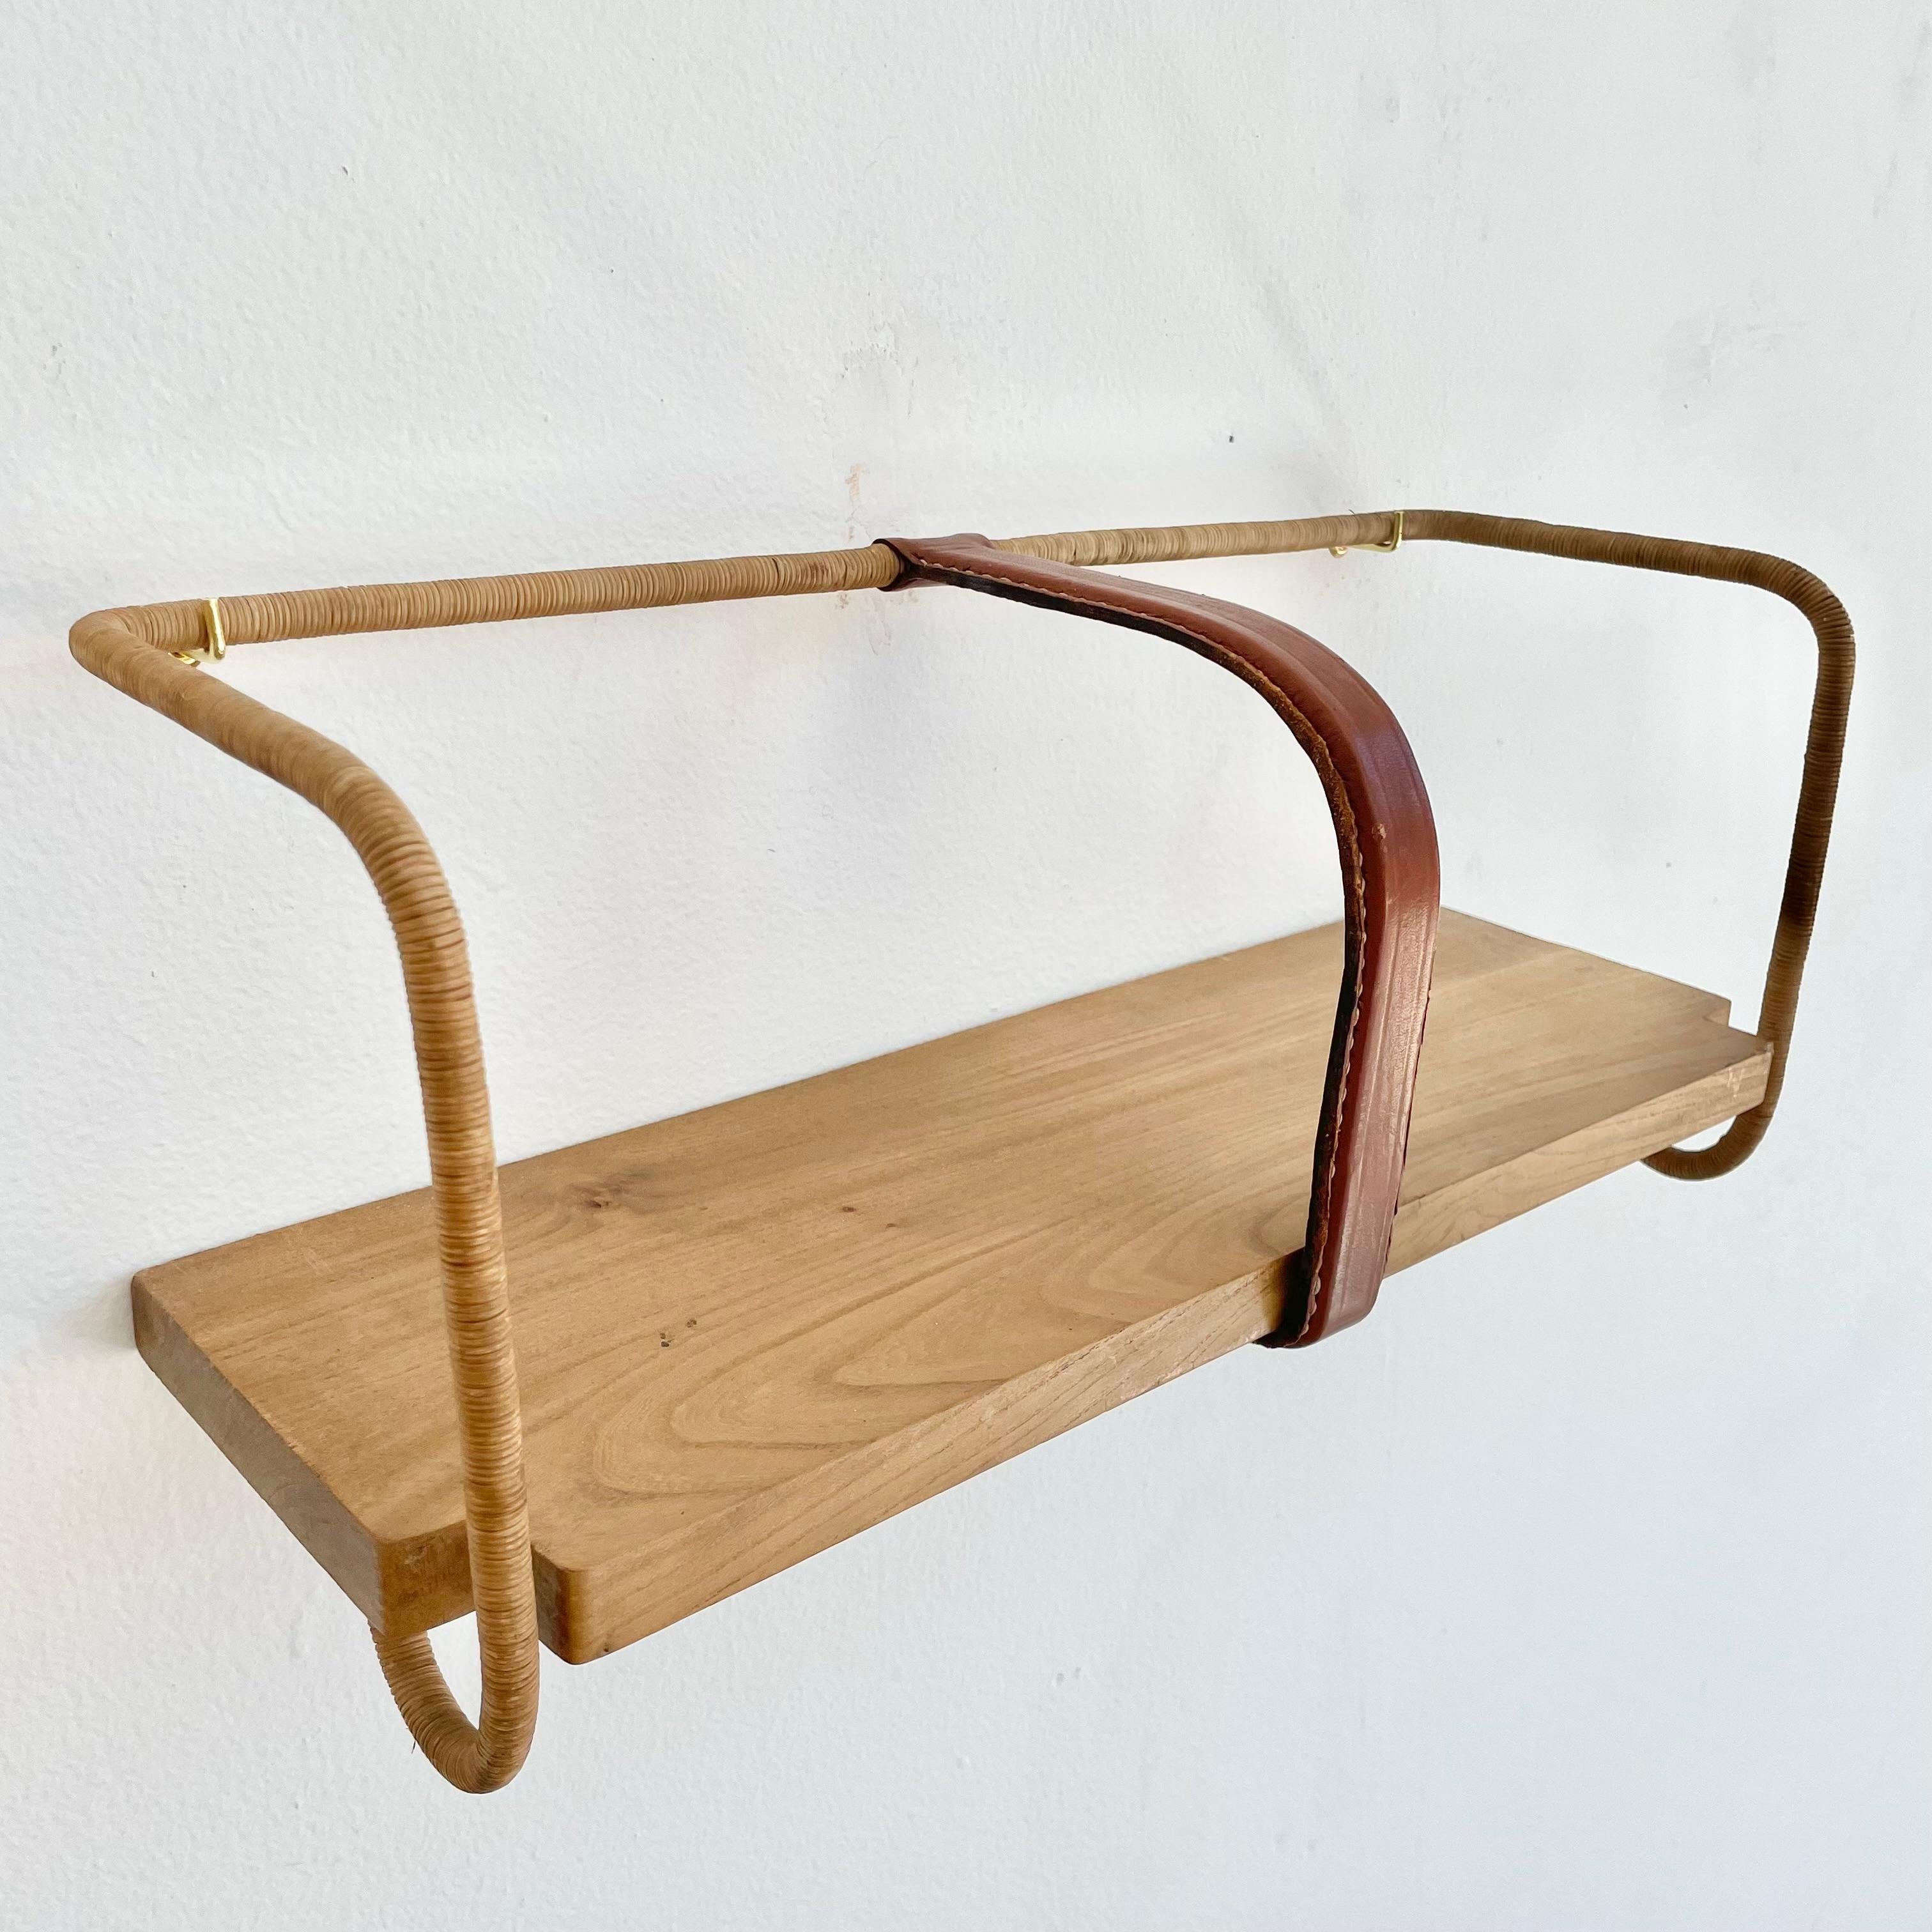 Jacques Adnet Leather, Wood and Twine Shelf, 1950s France For Sale 6